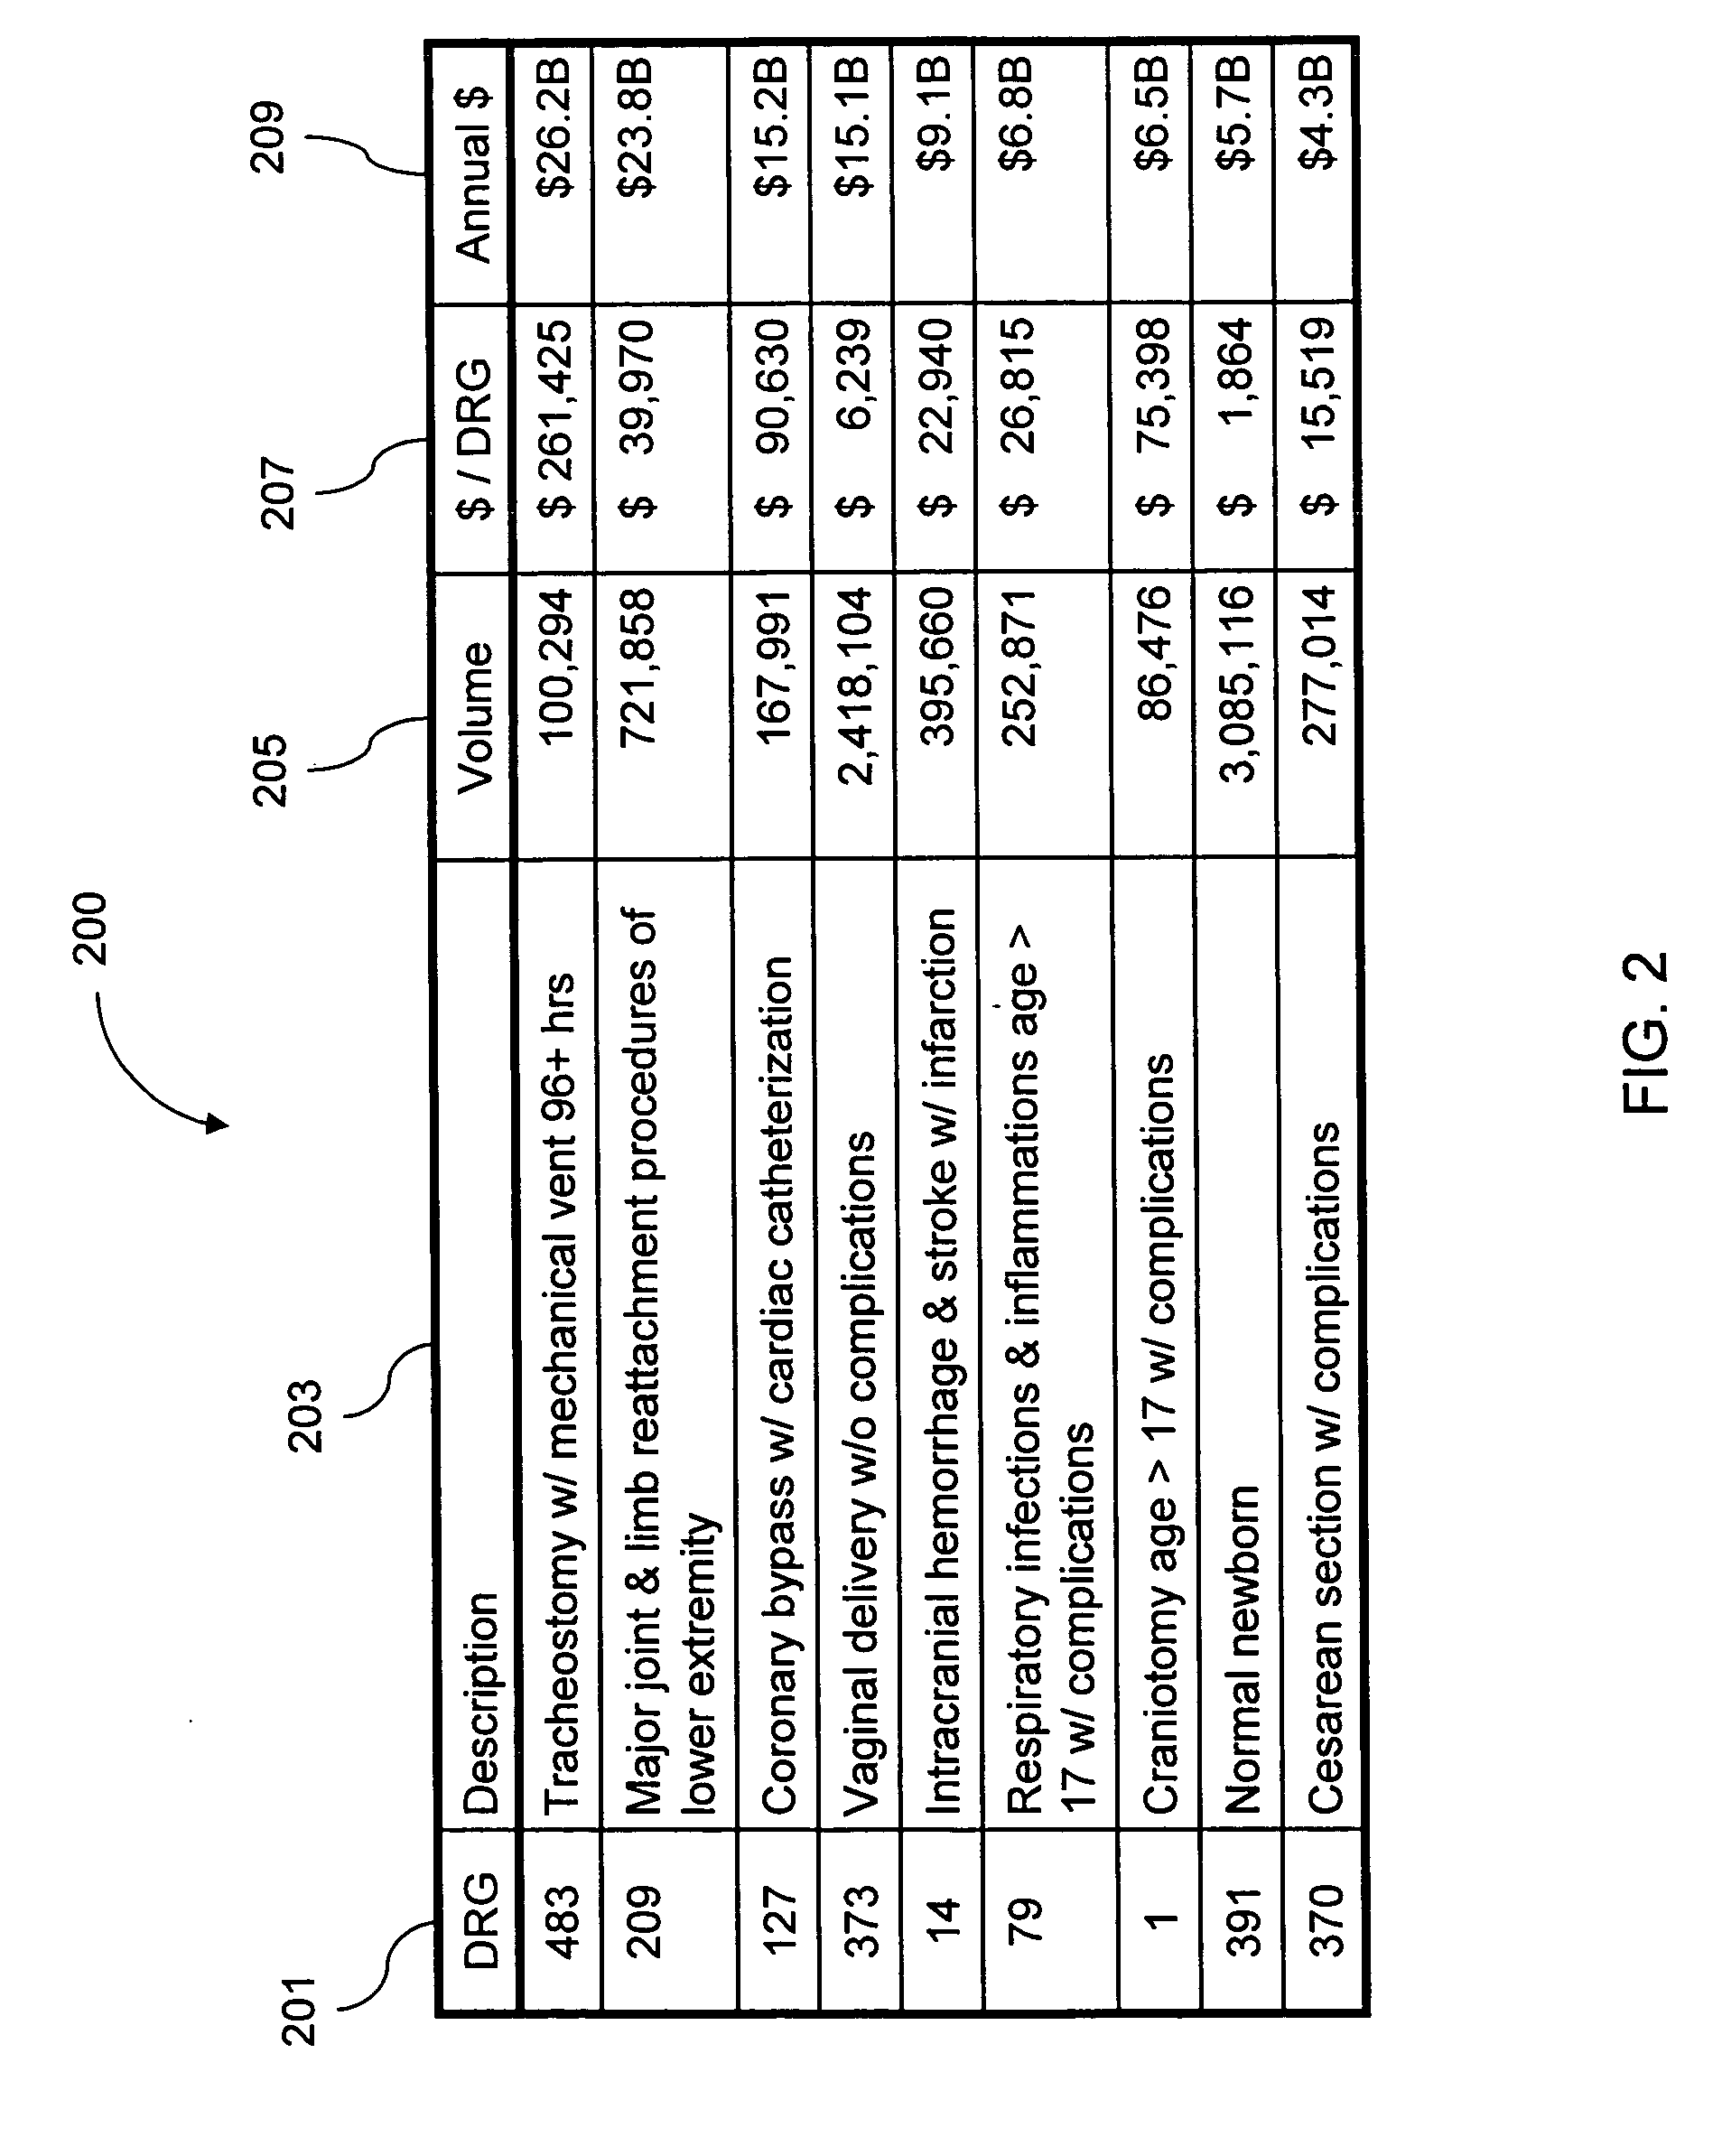 Method of creating and utilizing healthcare related commodoties